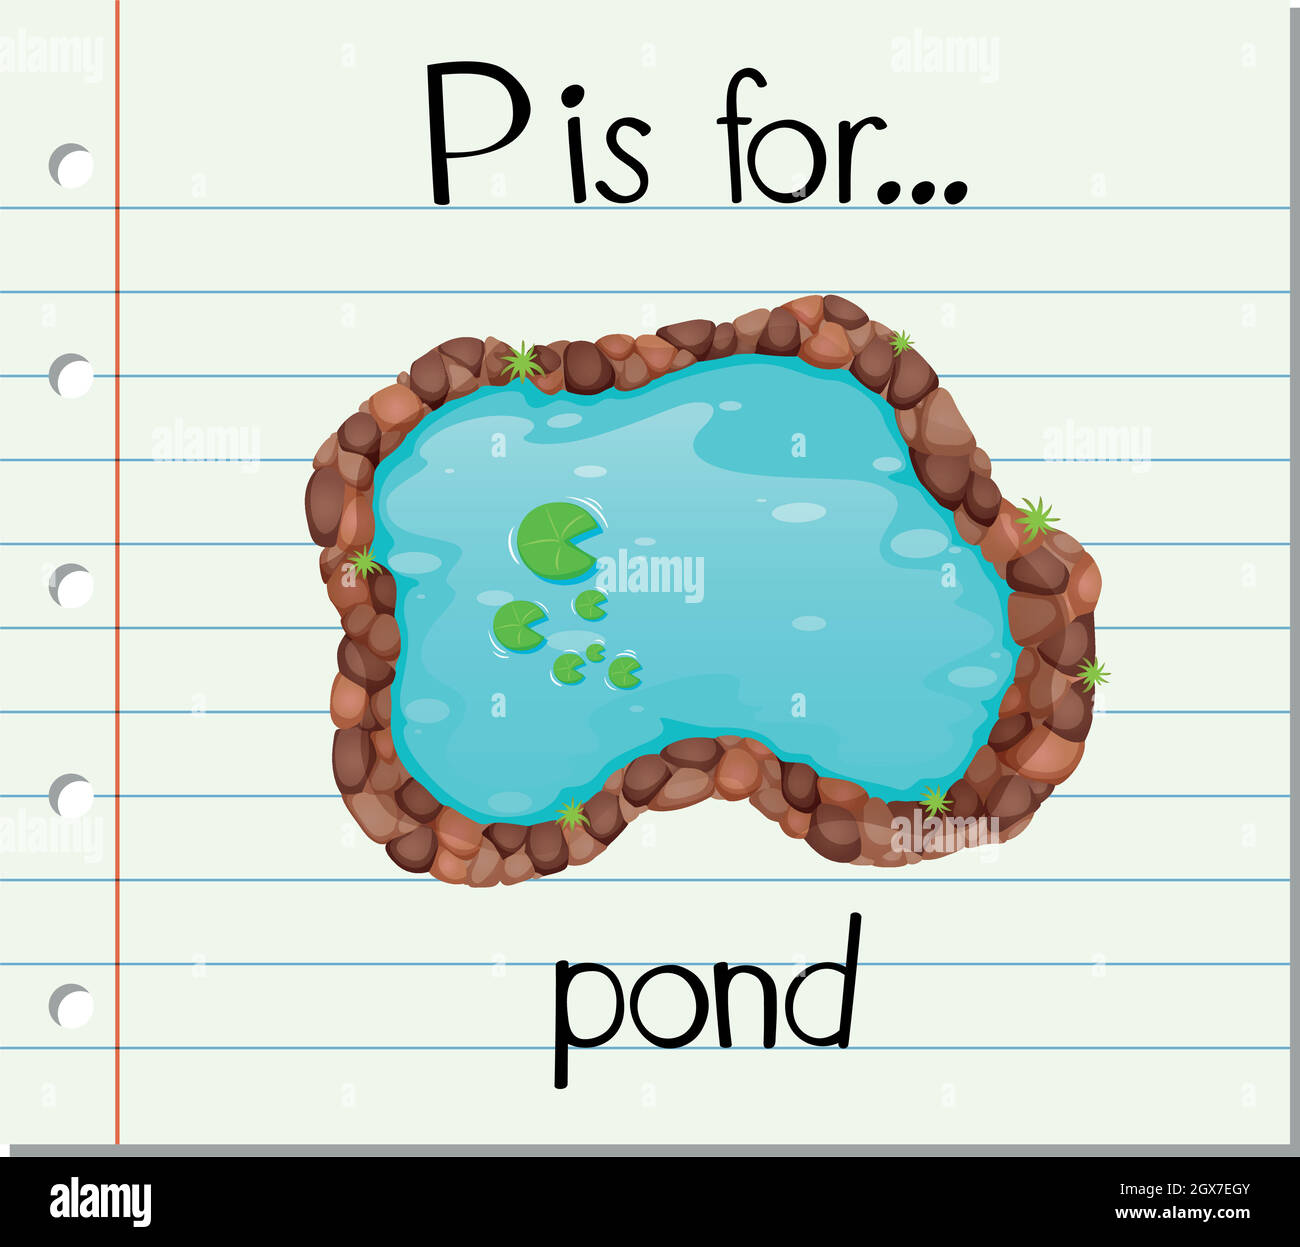 Flashcard letter P is for pond Stock Vector